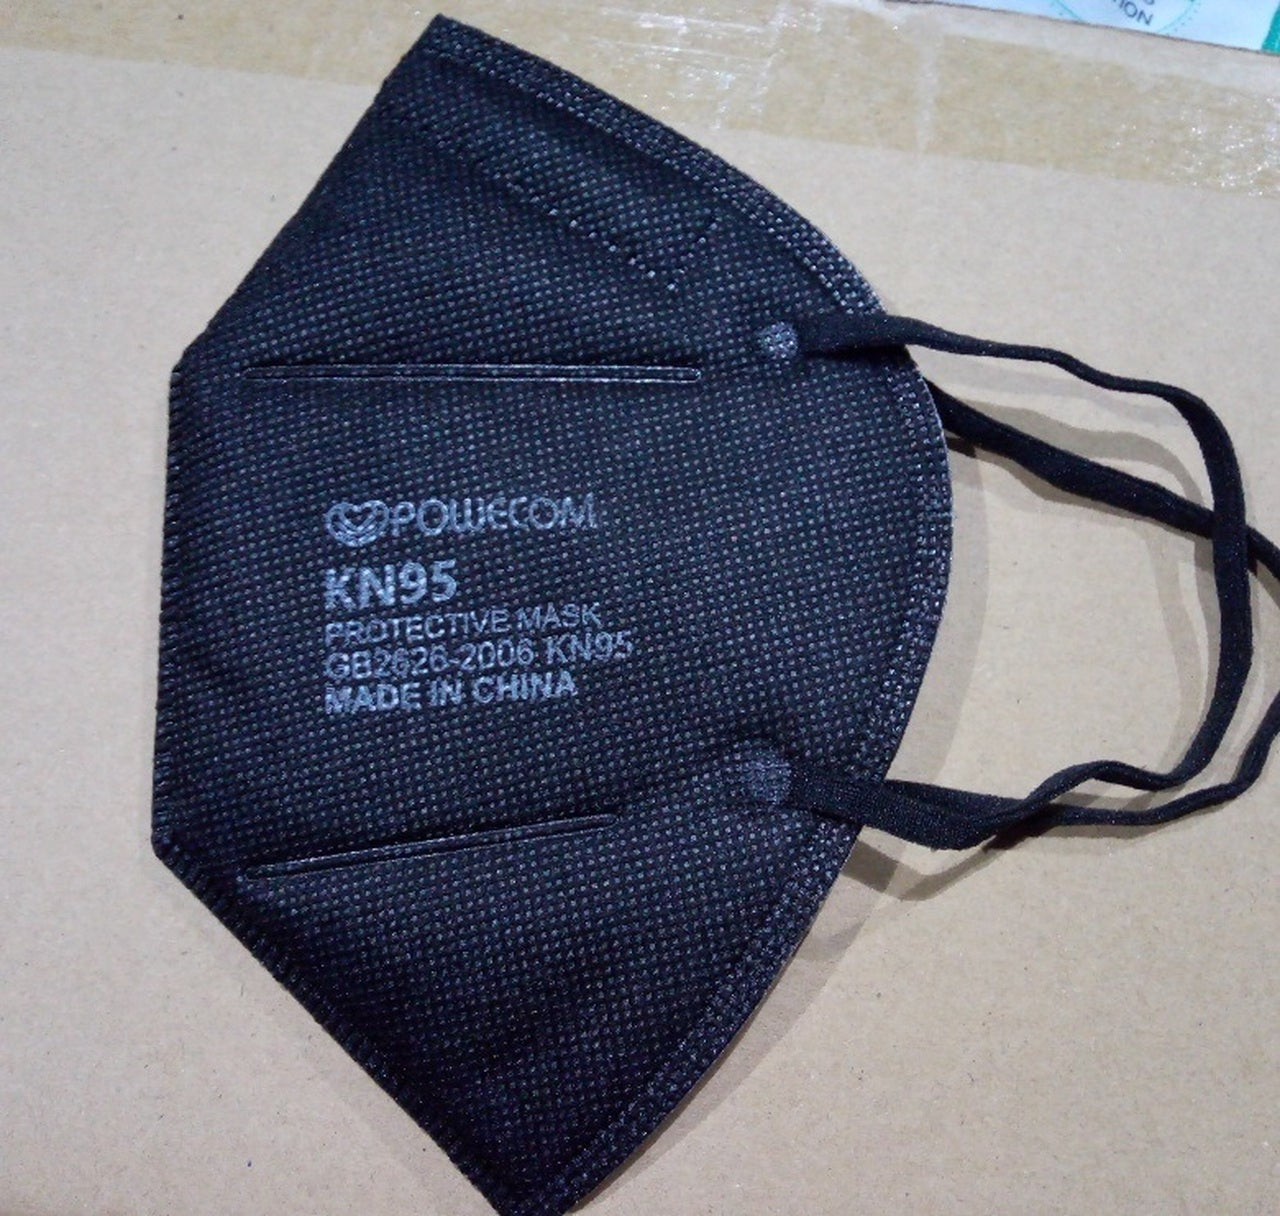 Black Powecom KN95 Facemask Respirator - FDA Cleared - Multipacks Available